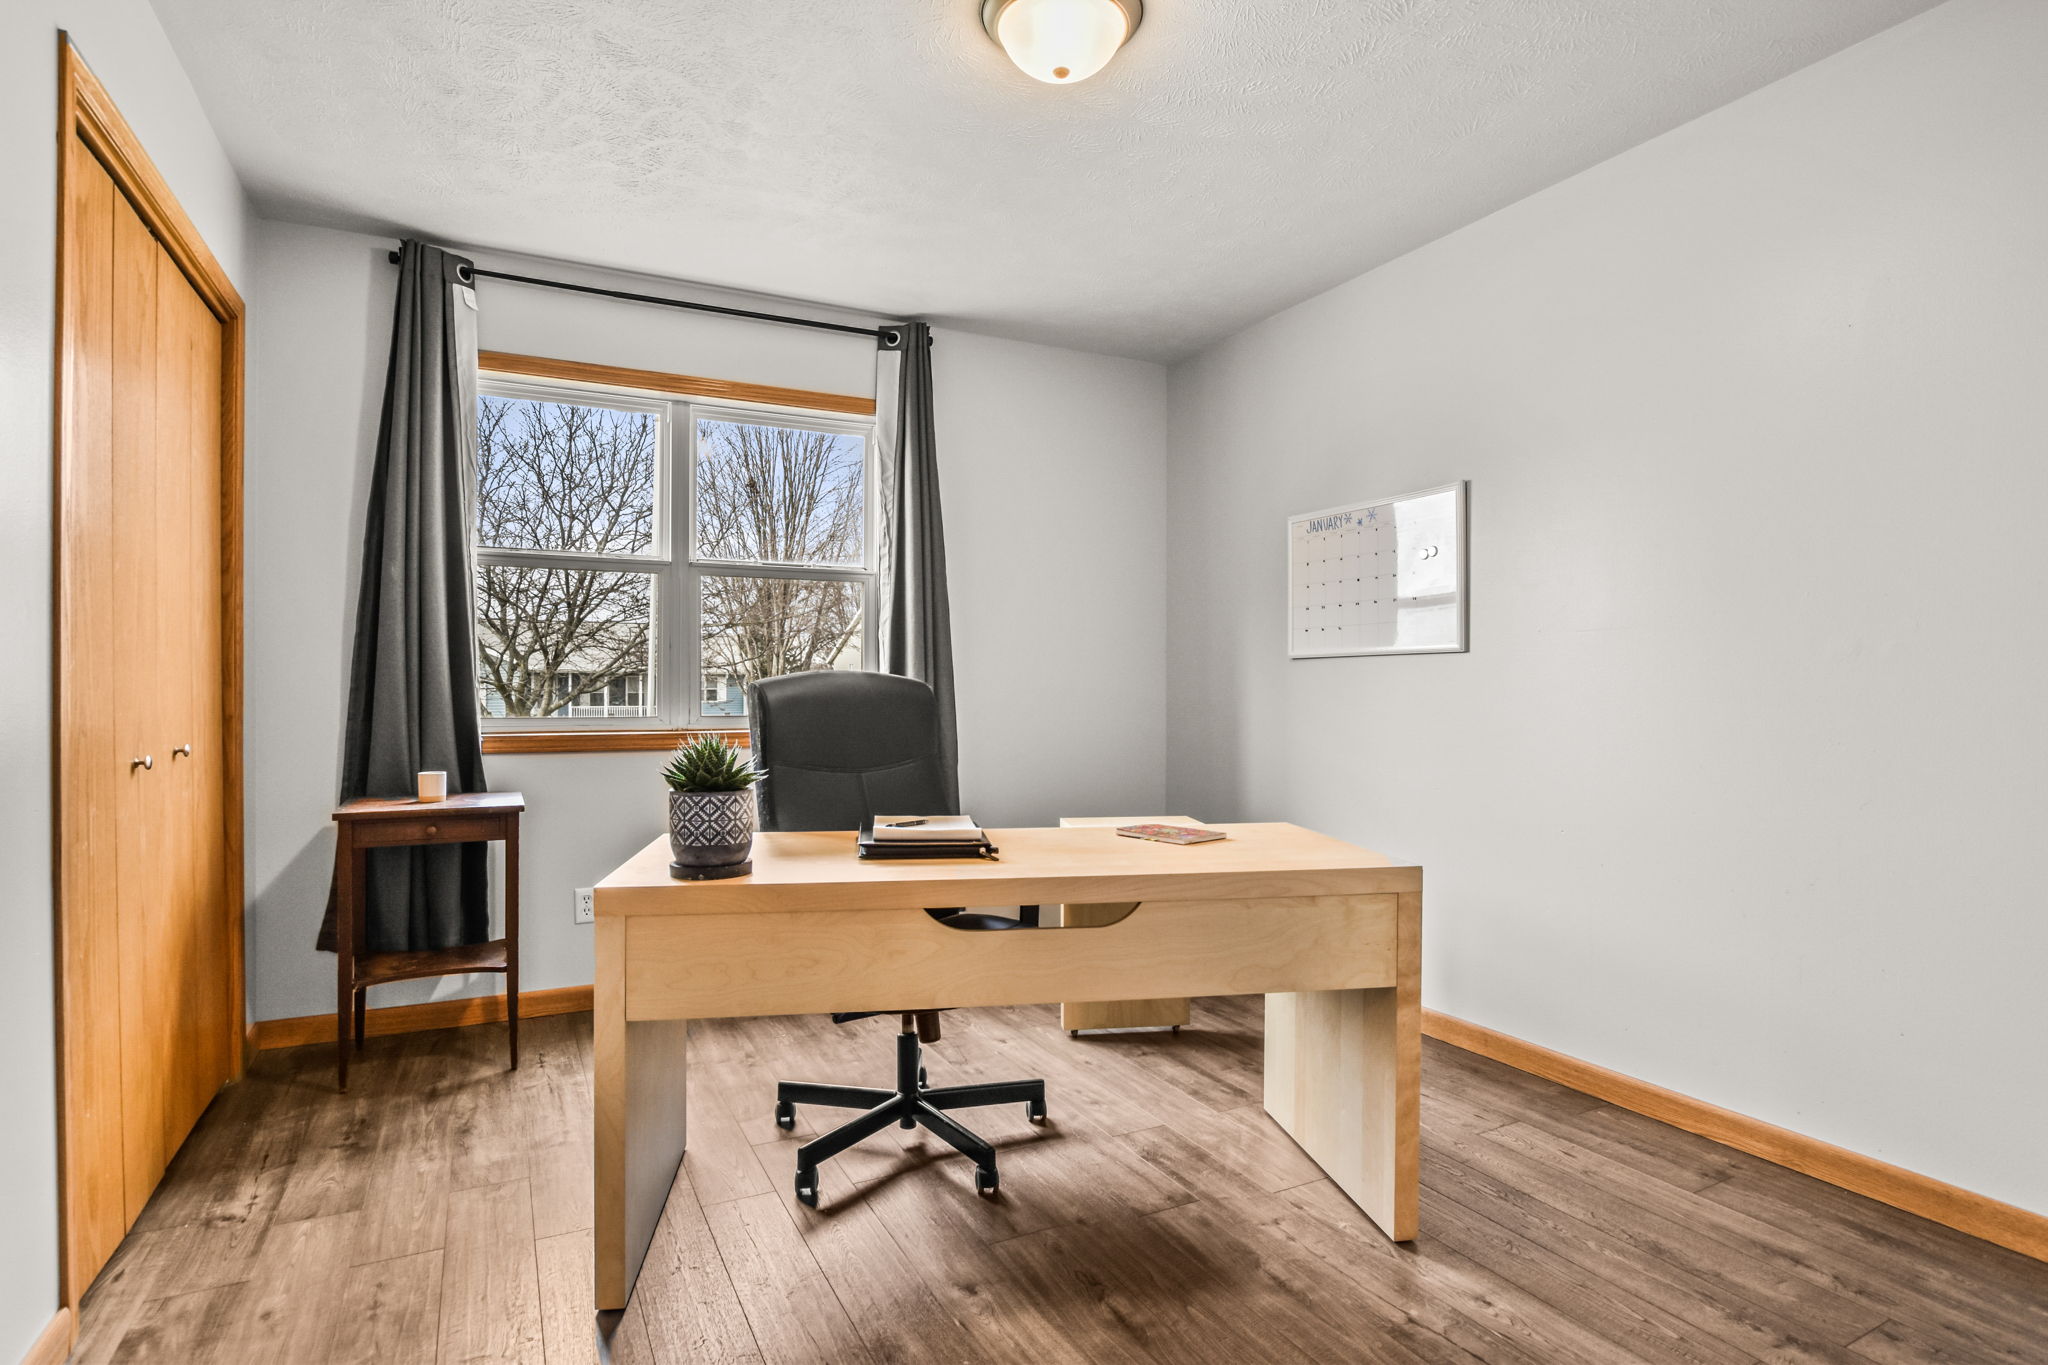 Office or guest room